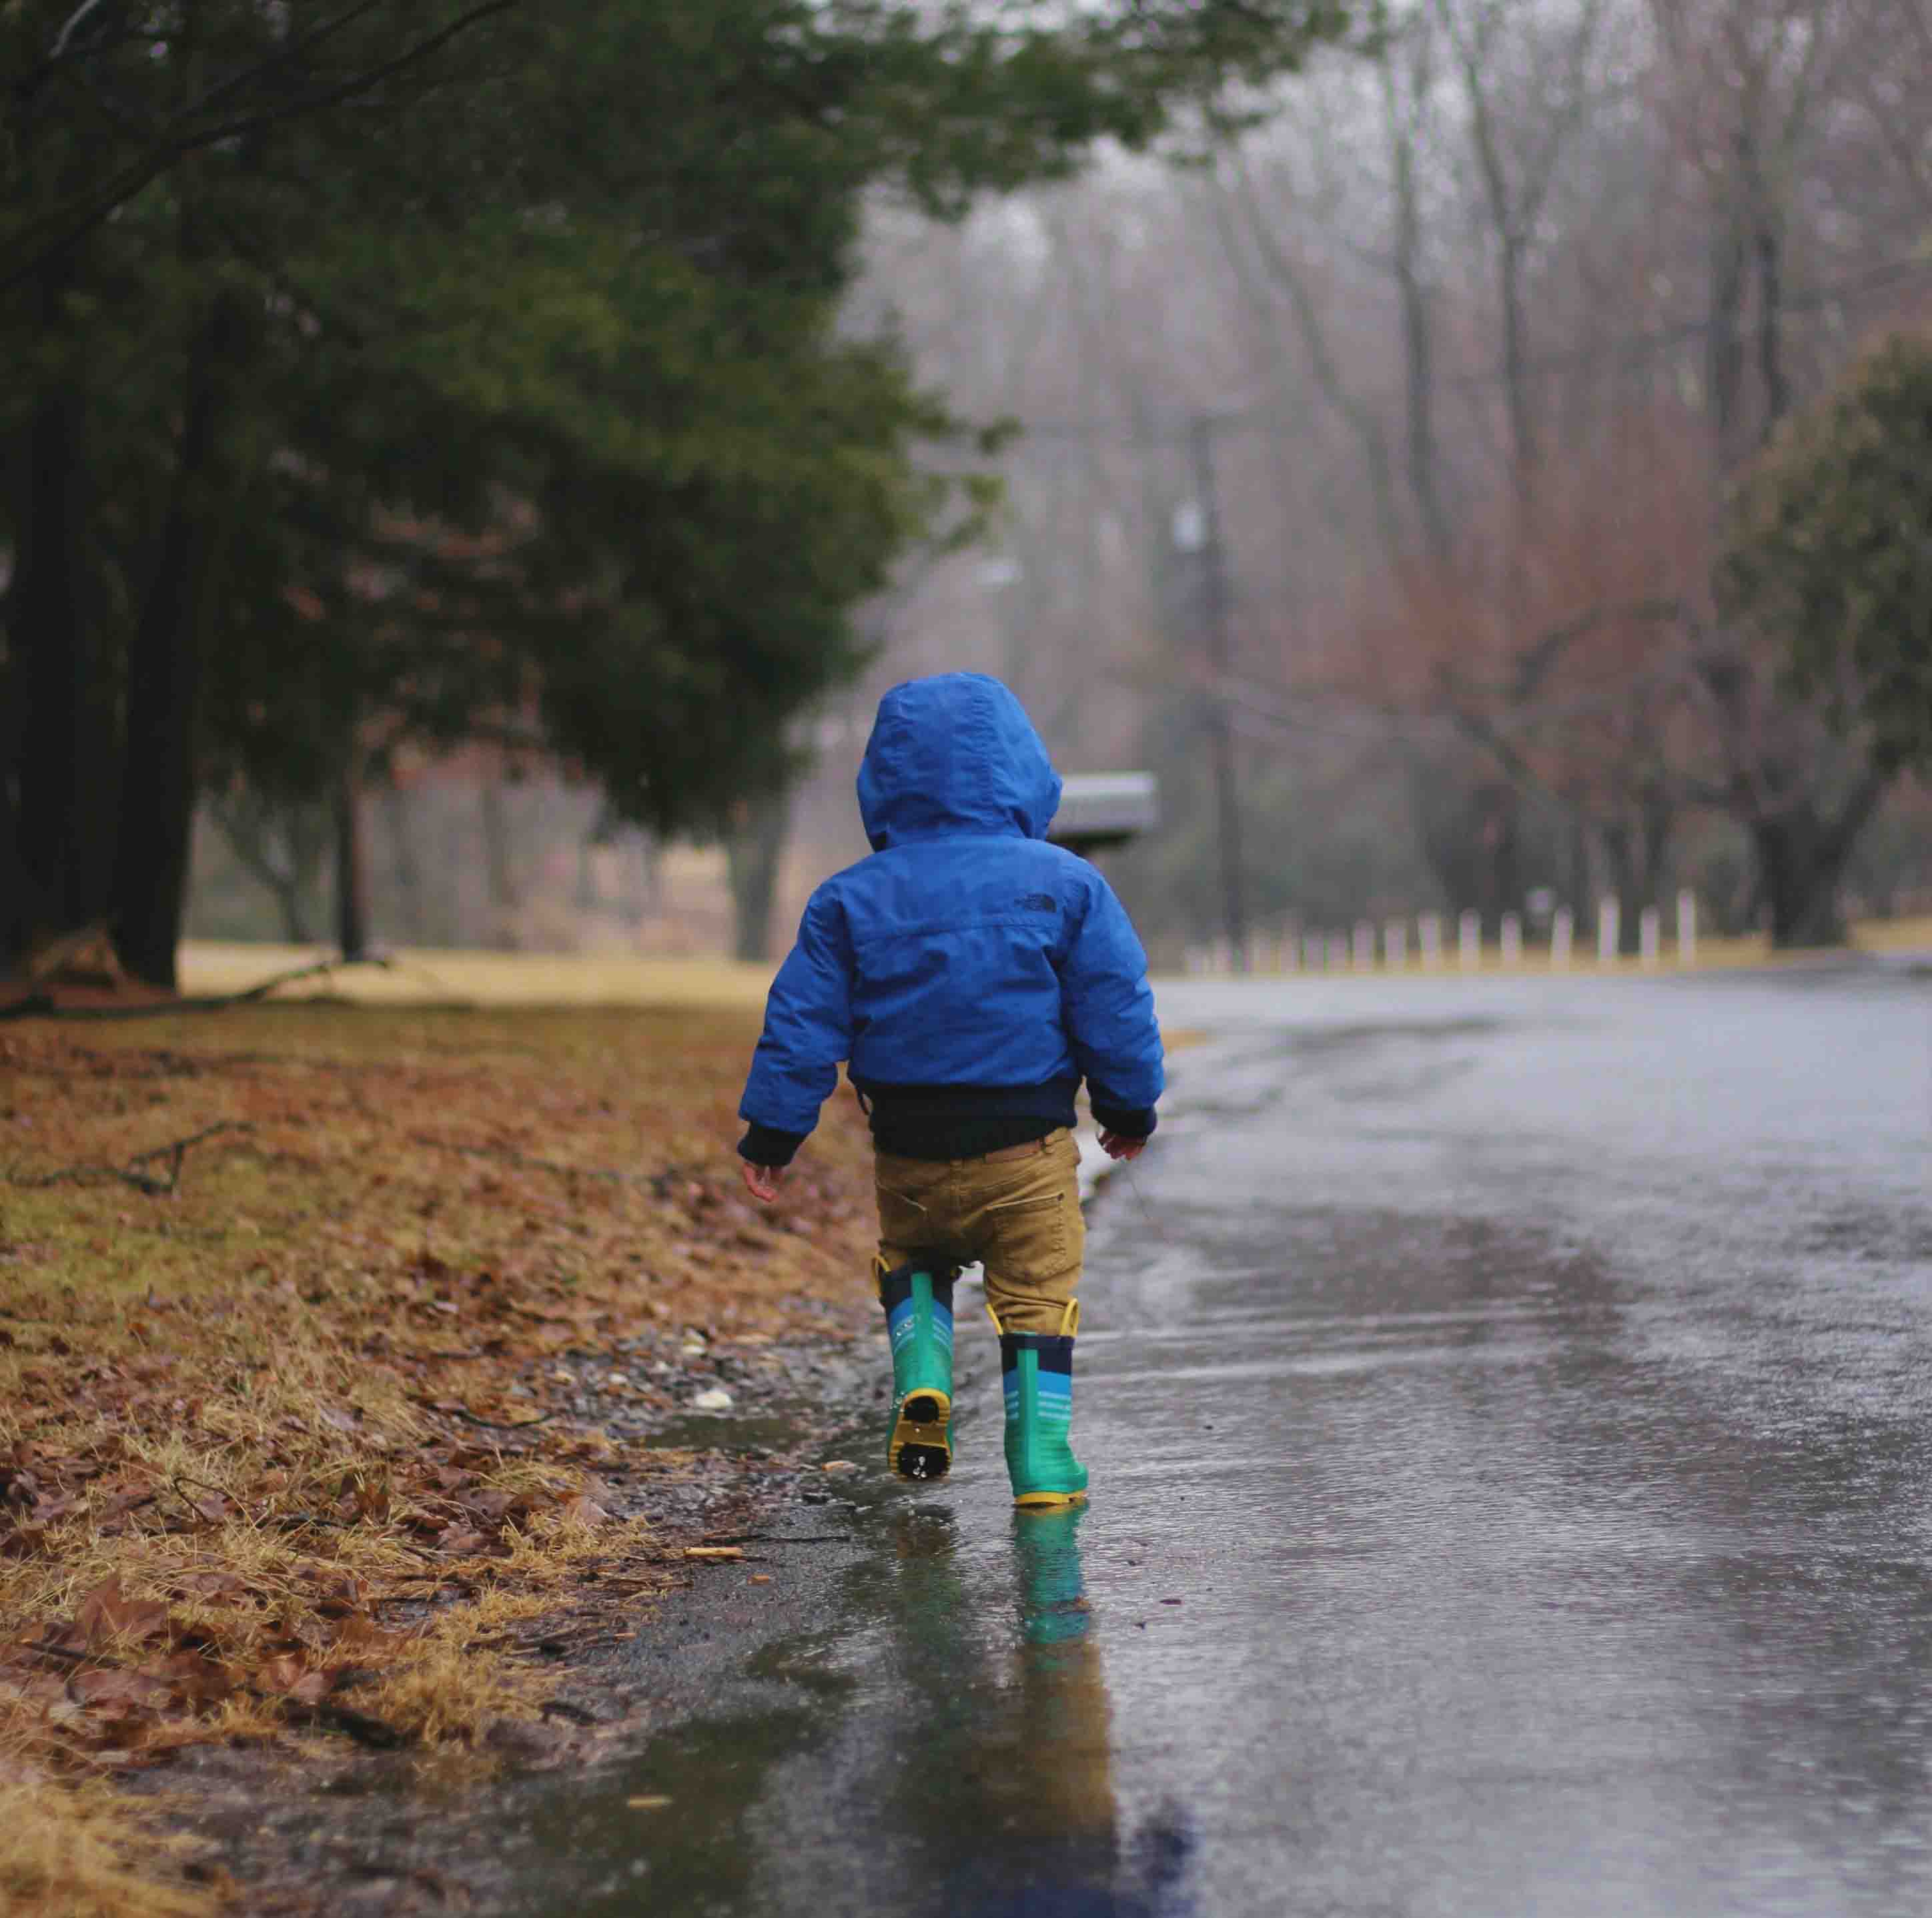 A toddler in a blue jacket and green and yellow wellies stomps through the puddles.